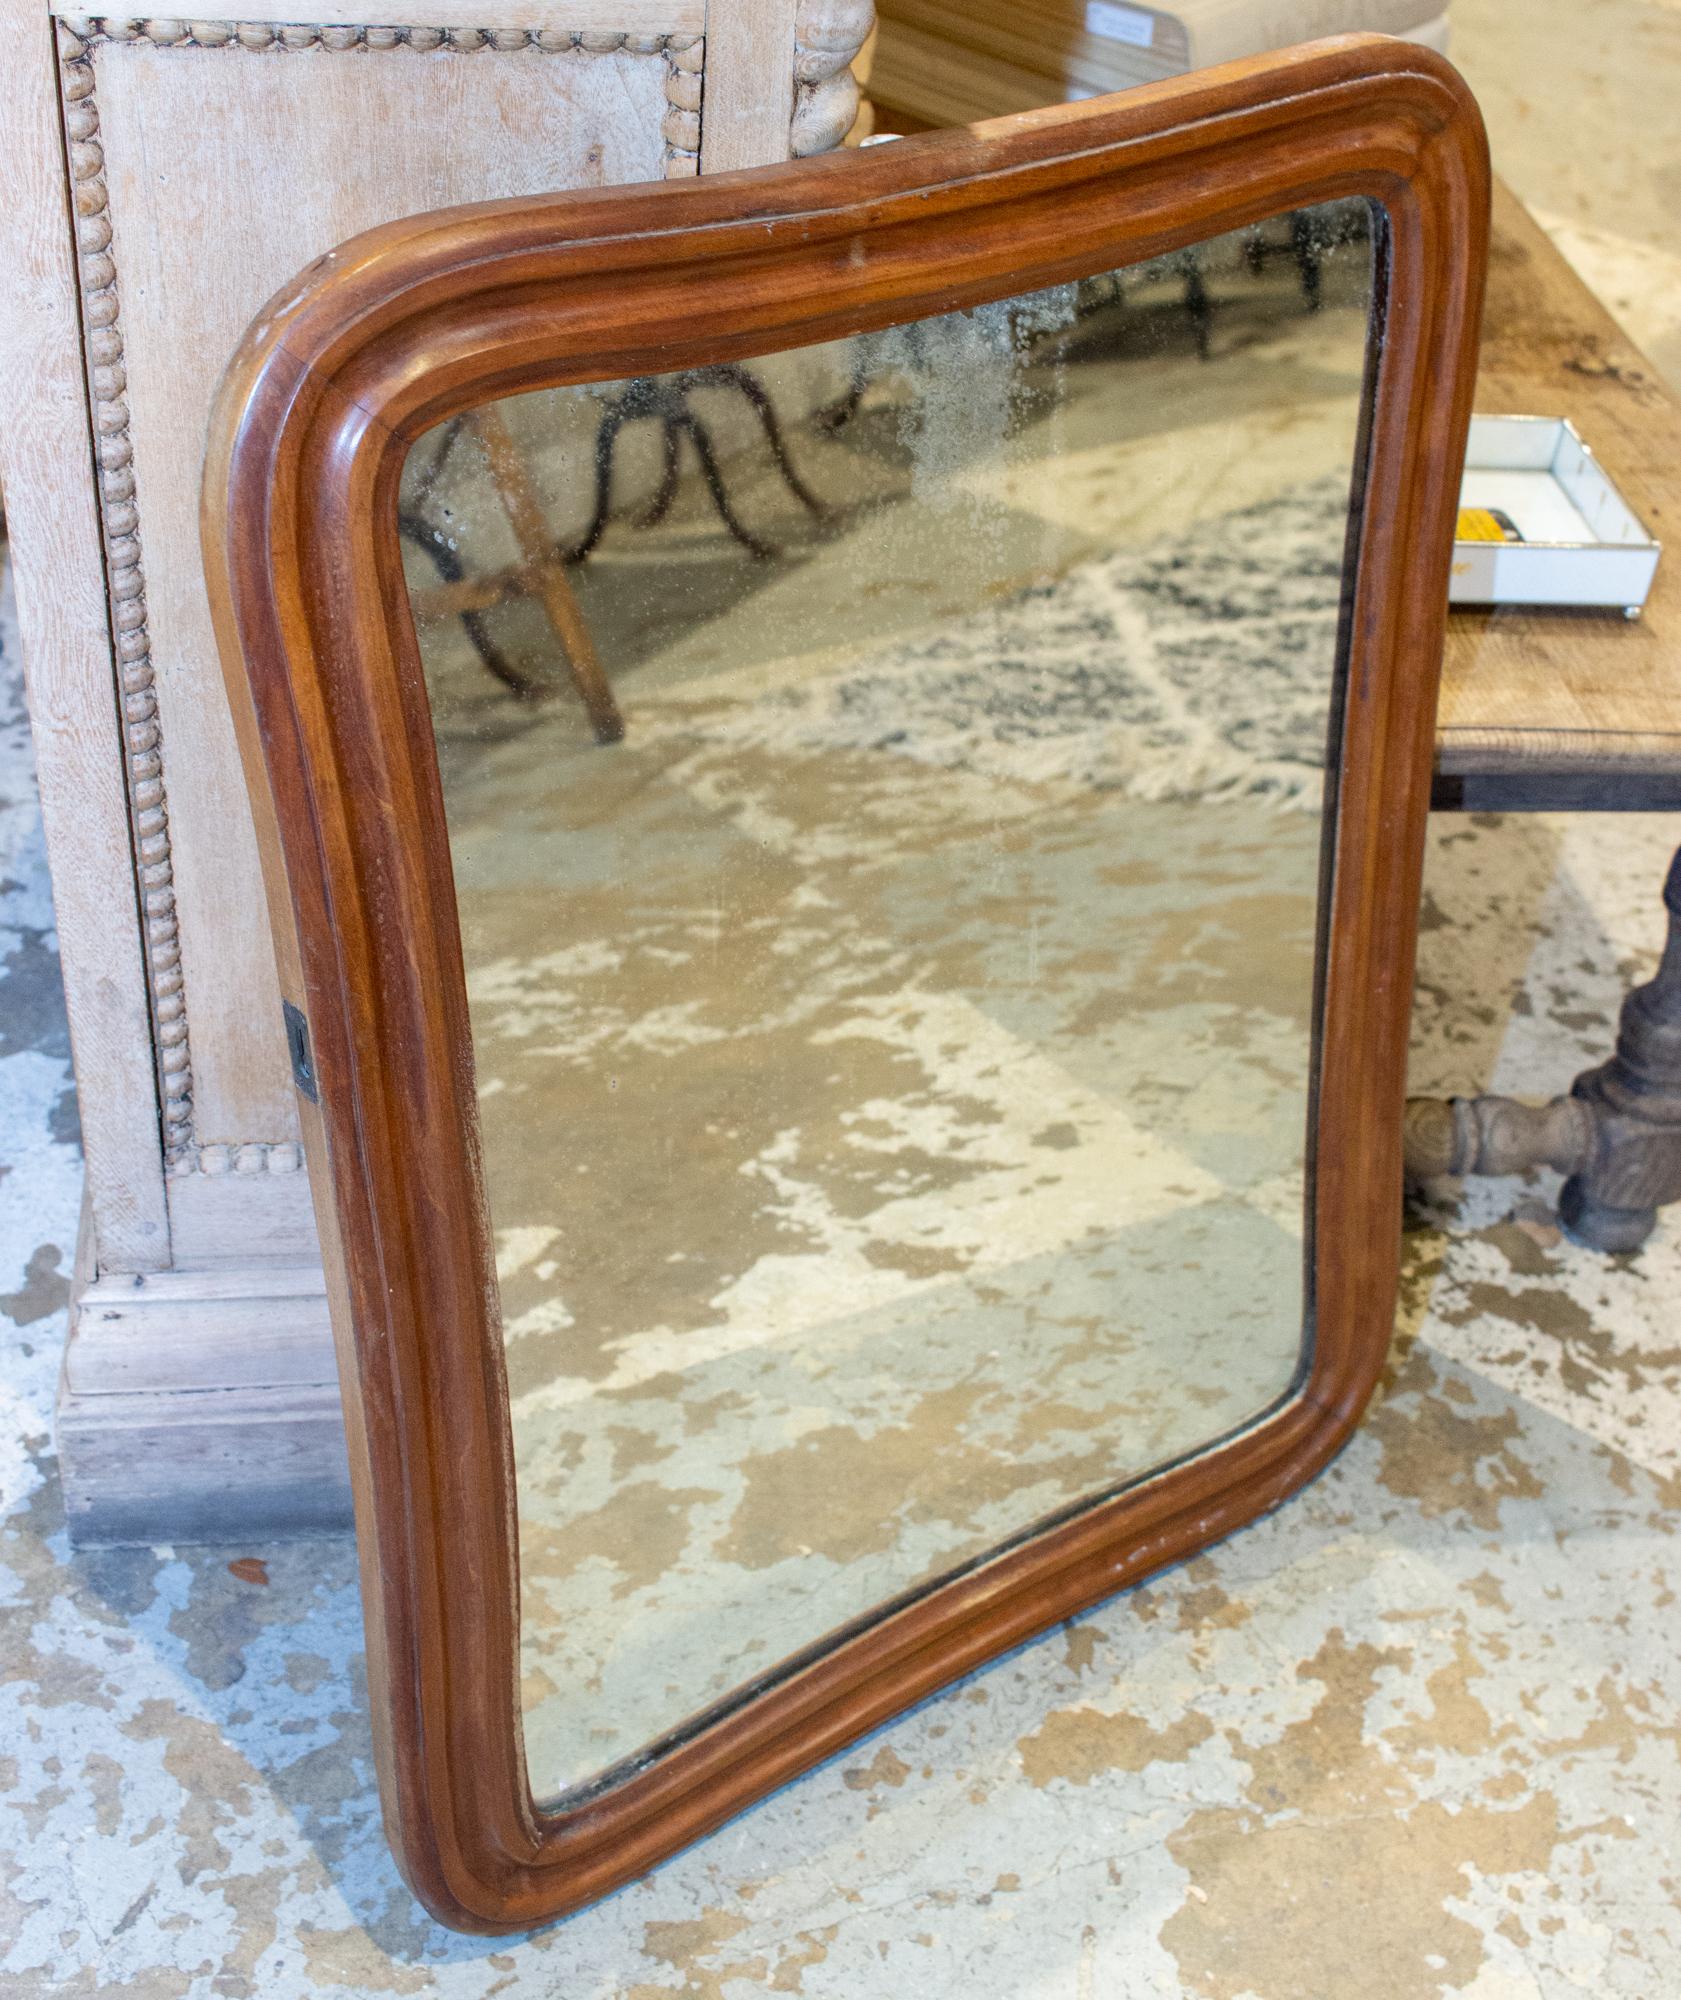 This antique French mirror with original glass has a beautiful carved oak frame with wonderful curves. The outside edges of each side of the mirror have metal hardware that appear to indicate this mirror may have been installed in a piece of